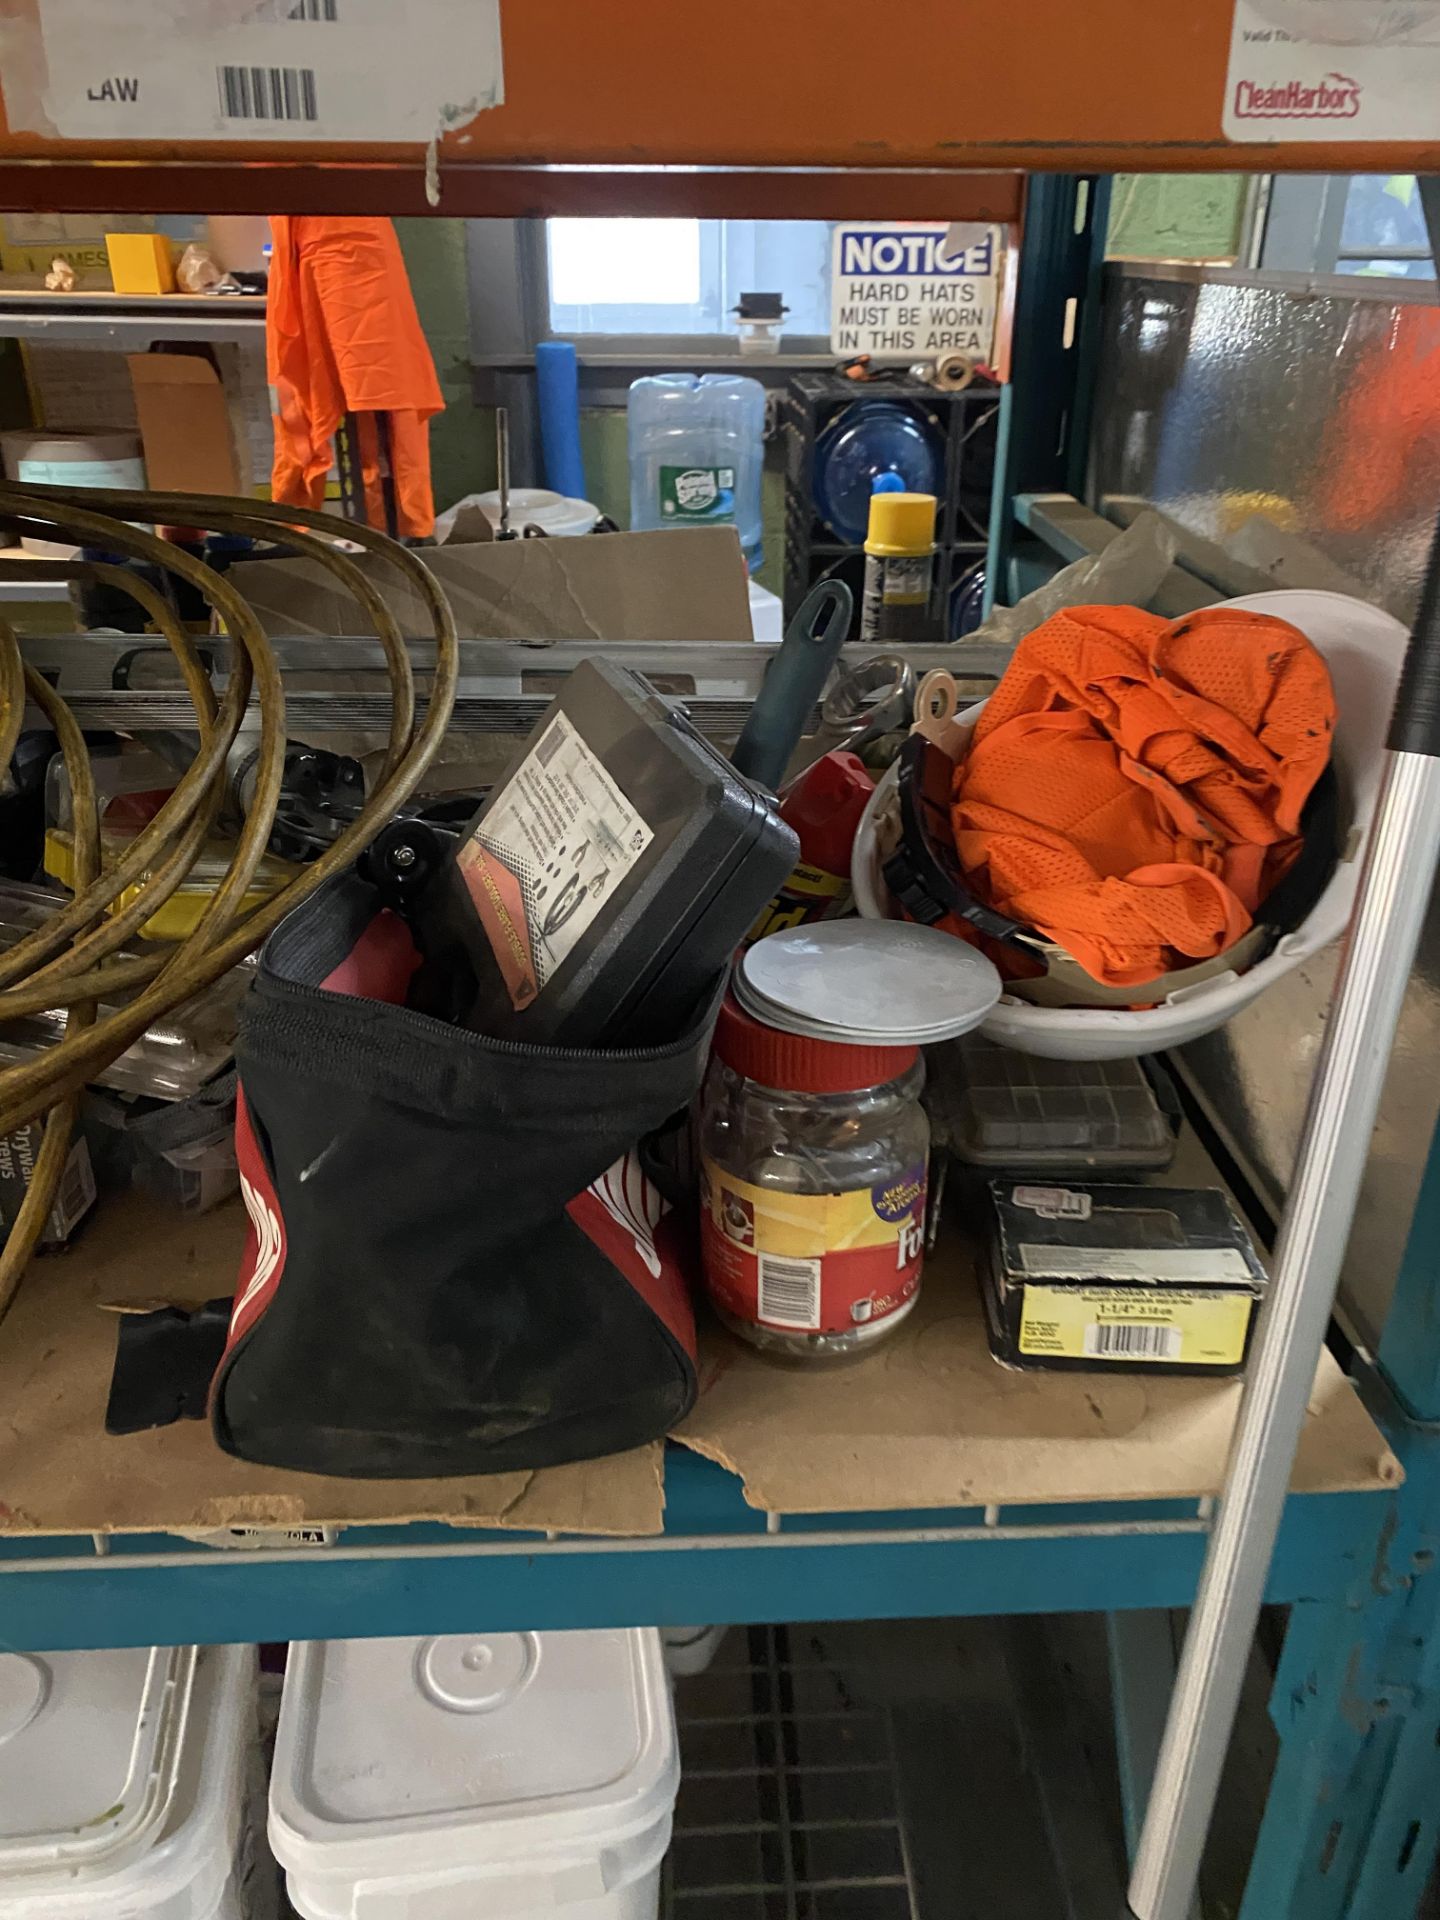 (Lot) Asst. Tools, Solvents, Lights, Tool Bags, Hard Hats On 1 Shelf ( Inspection Urged ) - Image 2 of 4